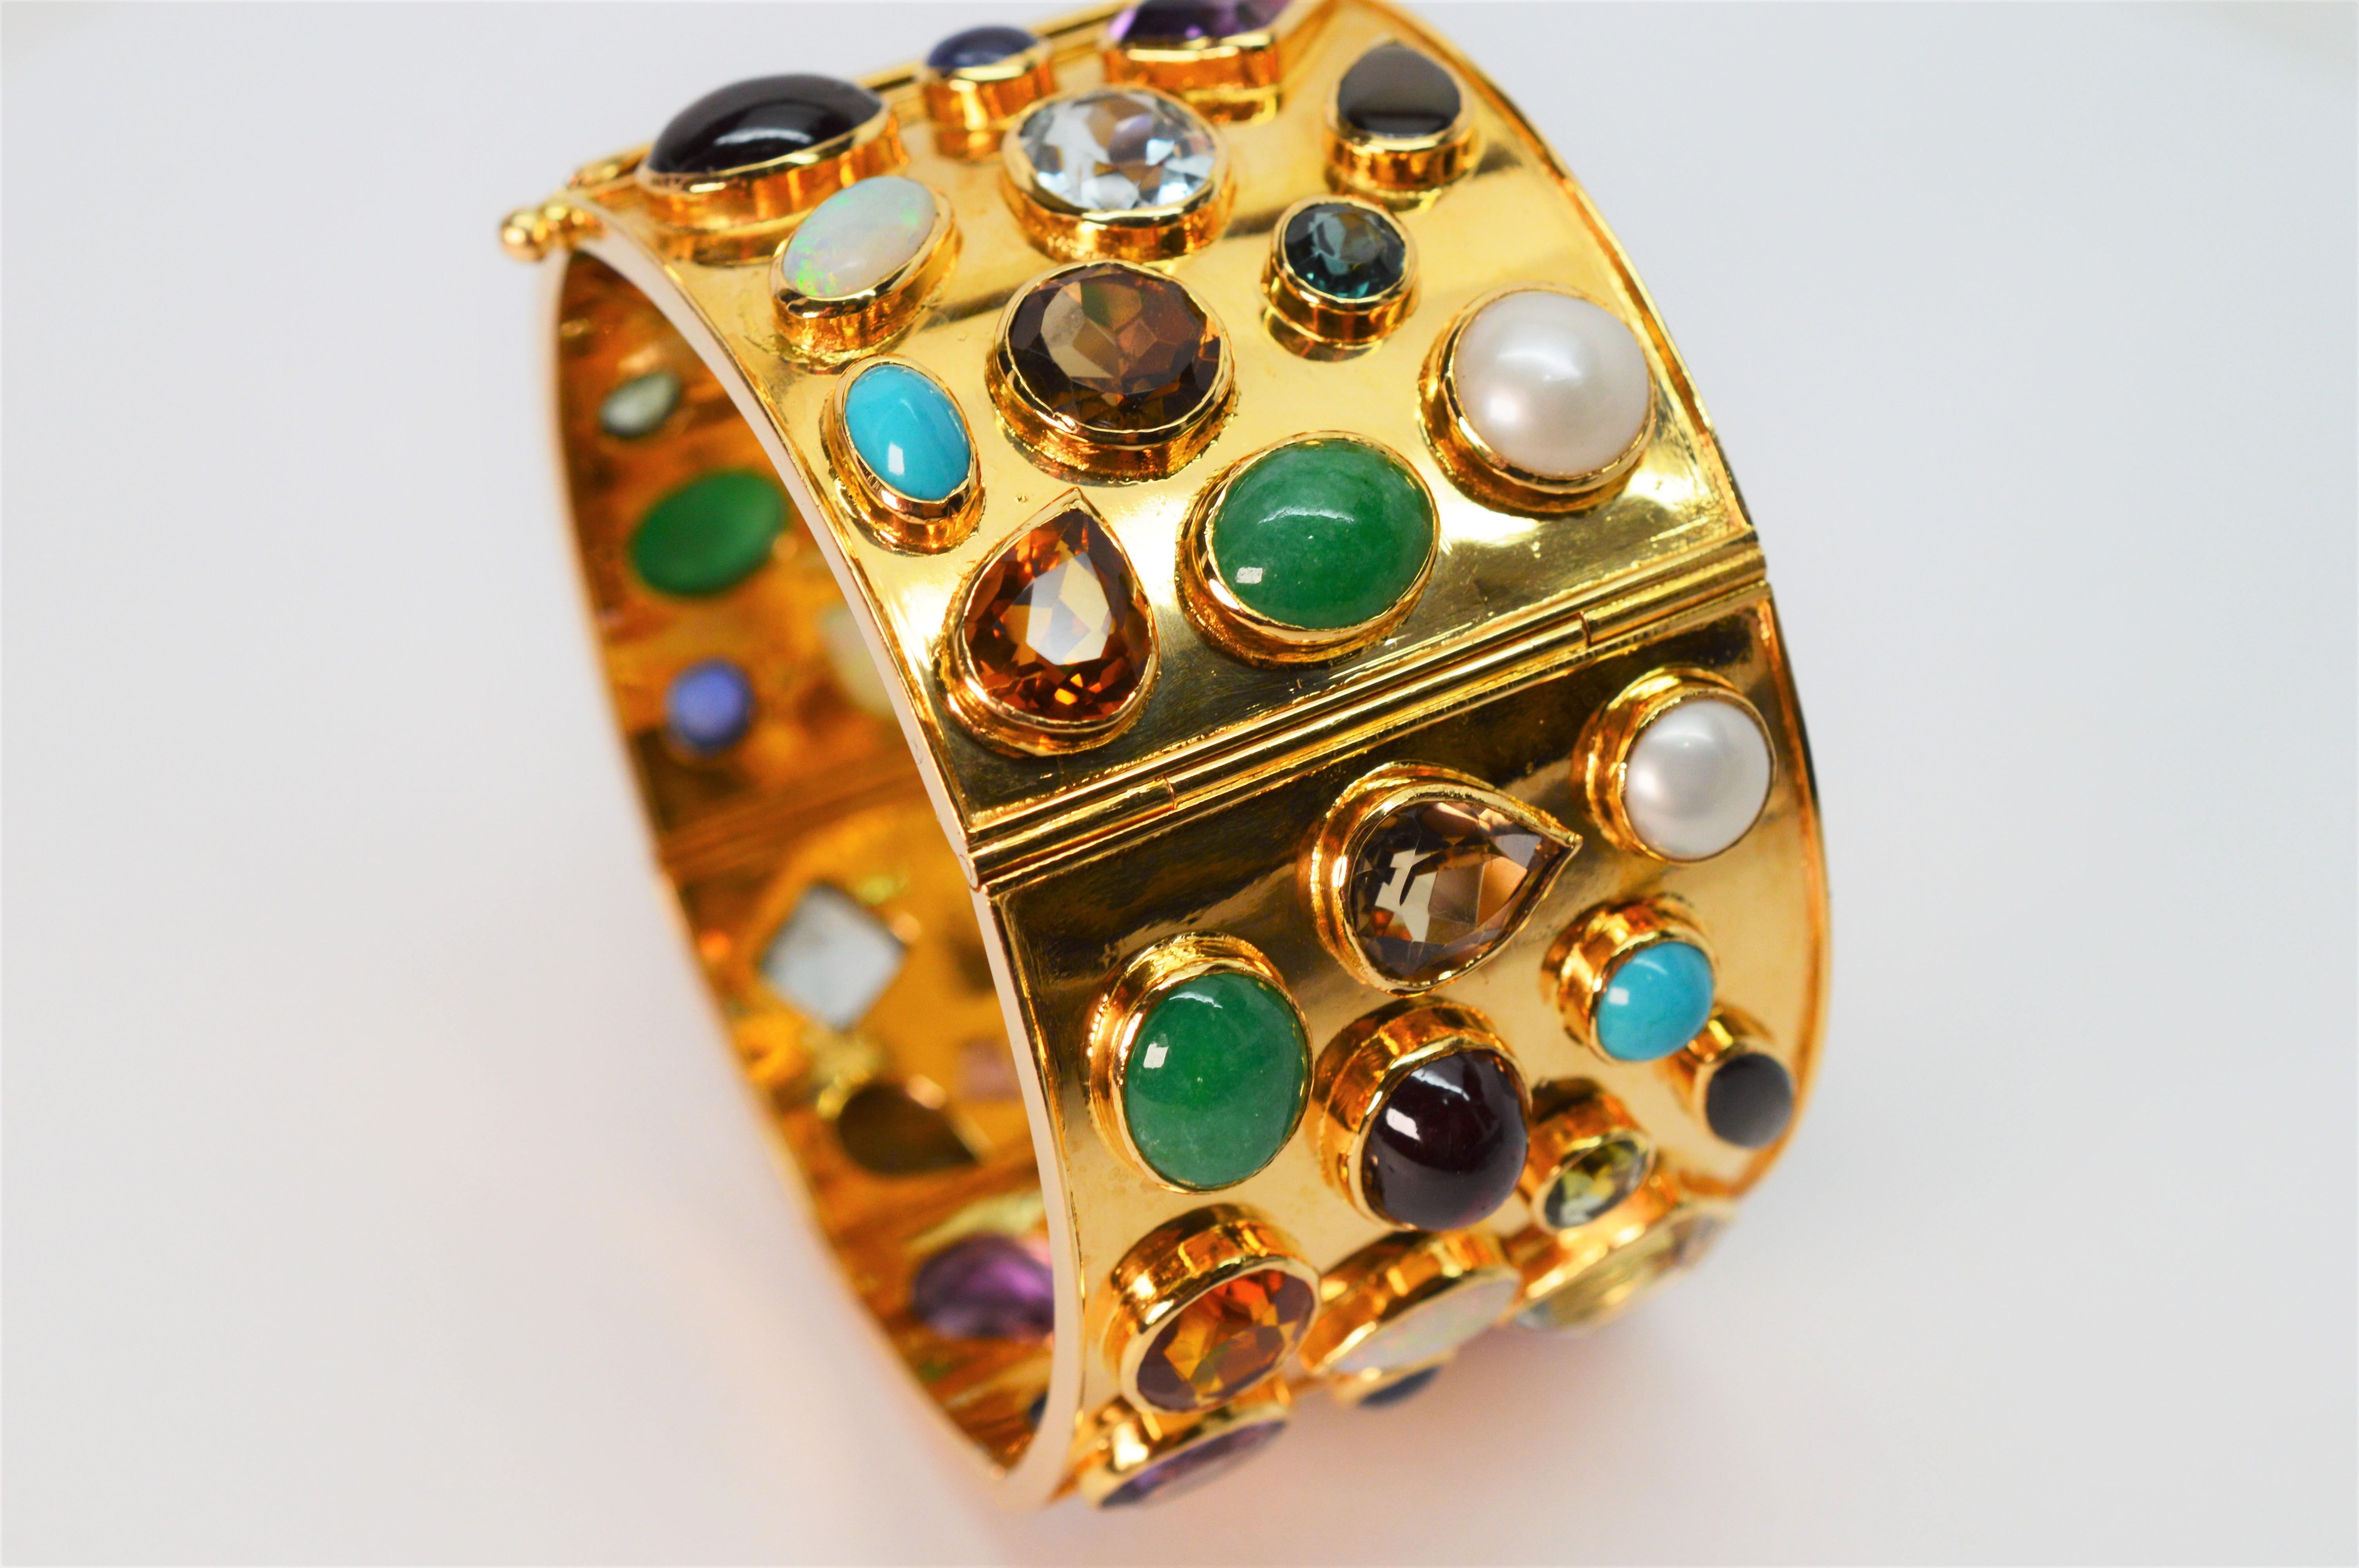 Place yourself in the spotlight with a rainbow of color and brilliant shine from this thrilling jeweled wide cuff bracelet in eighteen karat 18K yellow gold. This spectacular piece is artisan made with an eclectic and colorful mix of natural